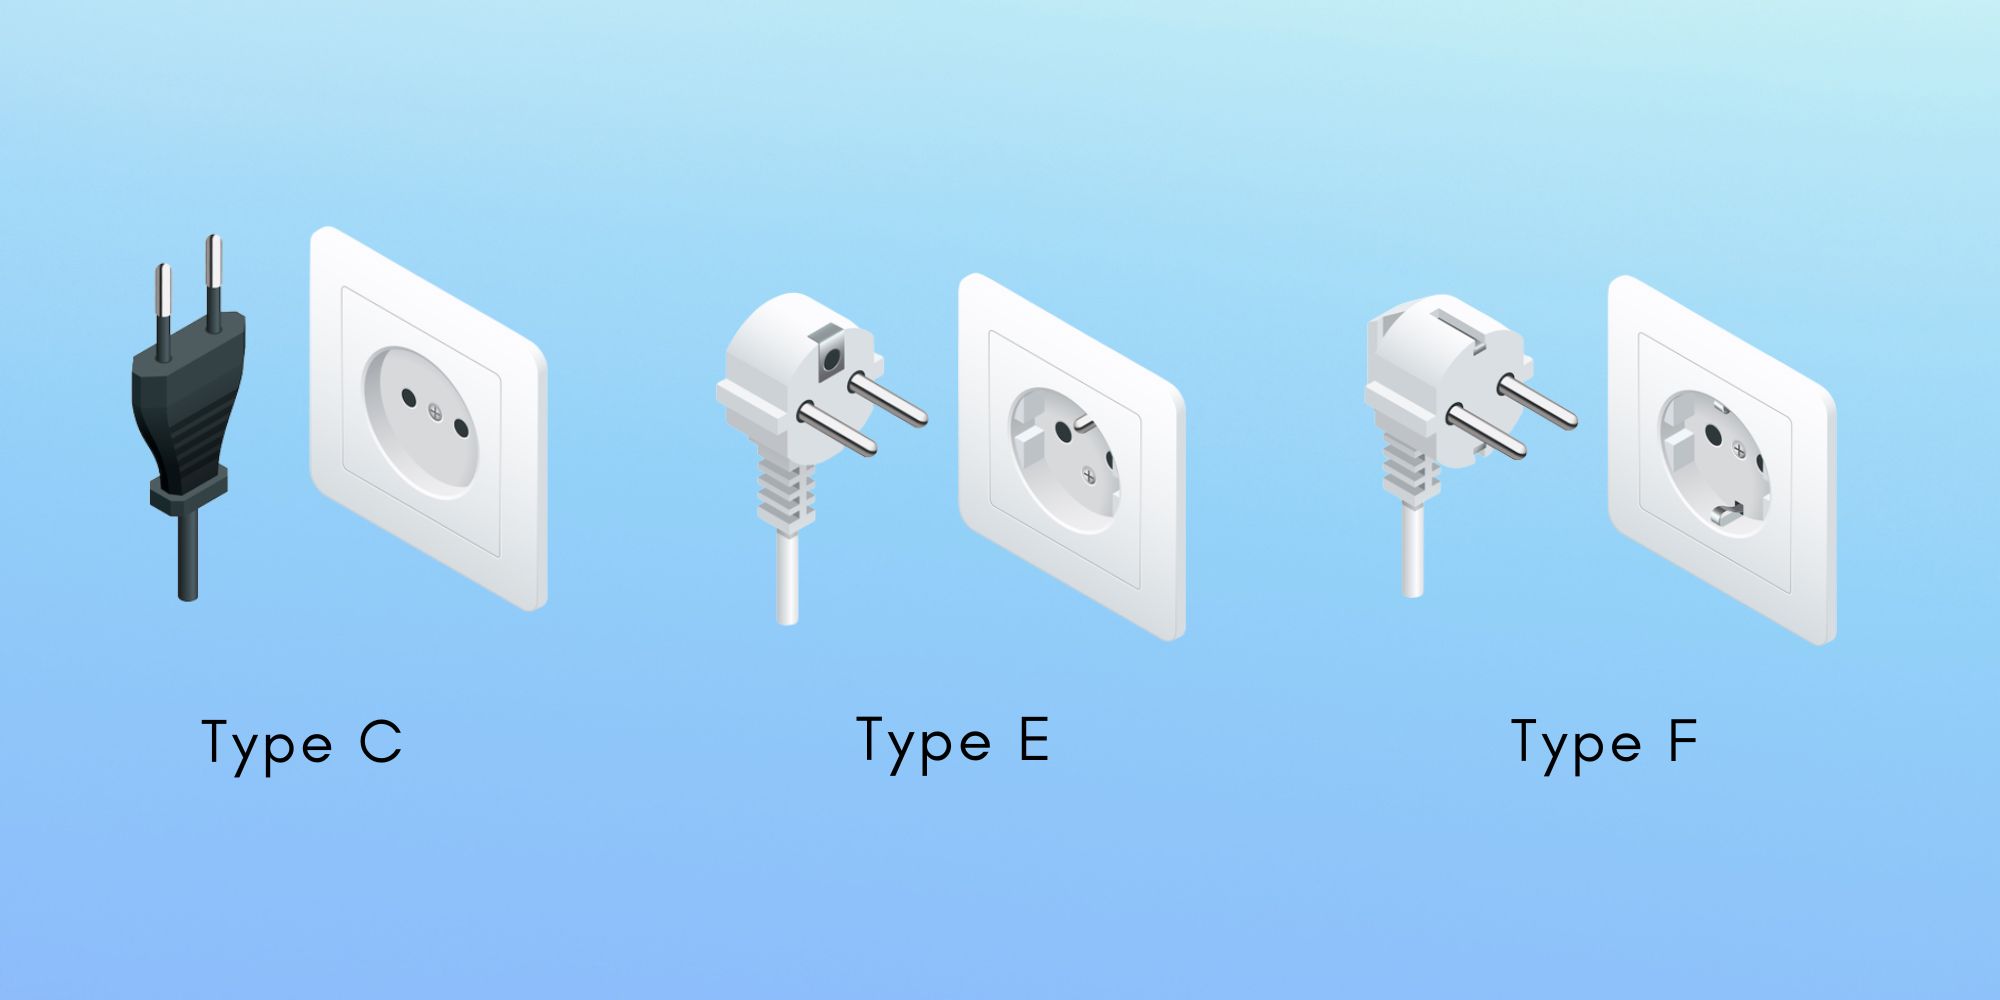 Saint Pierre and Miquelon Power Plugs and Sockets: Type C, Type E, and Type F
